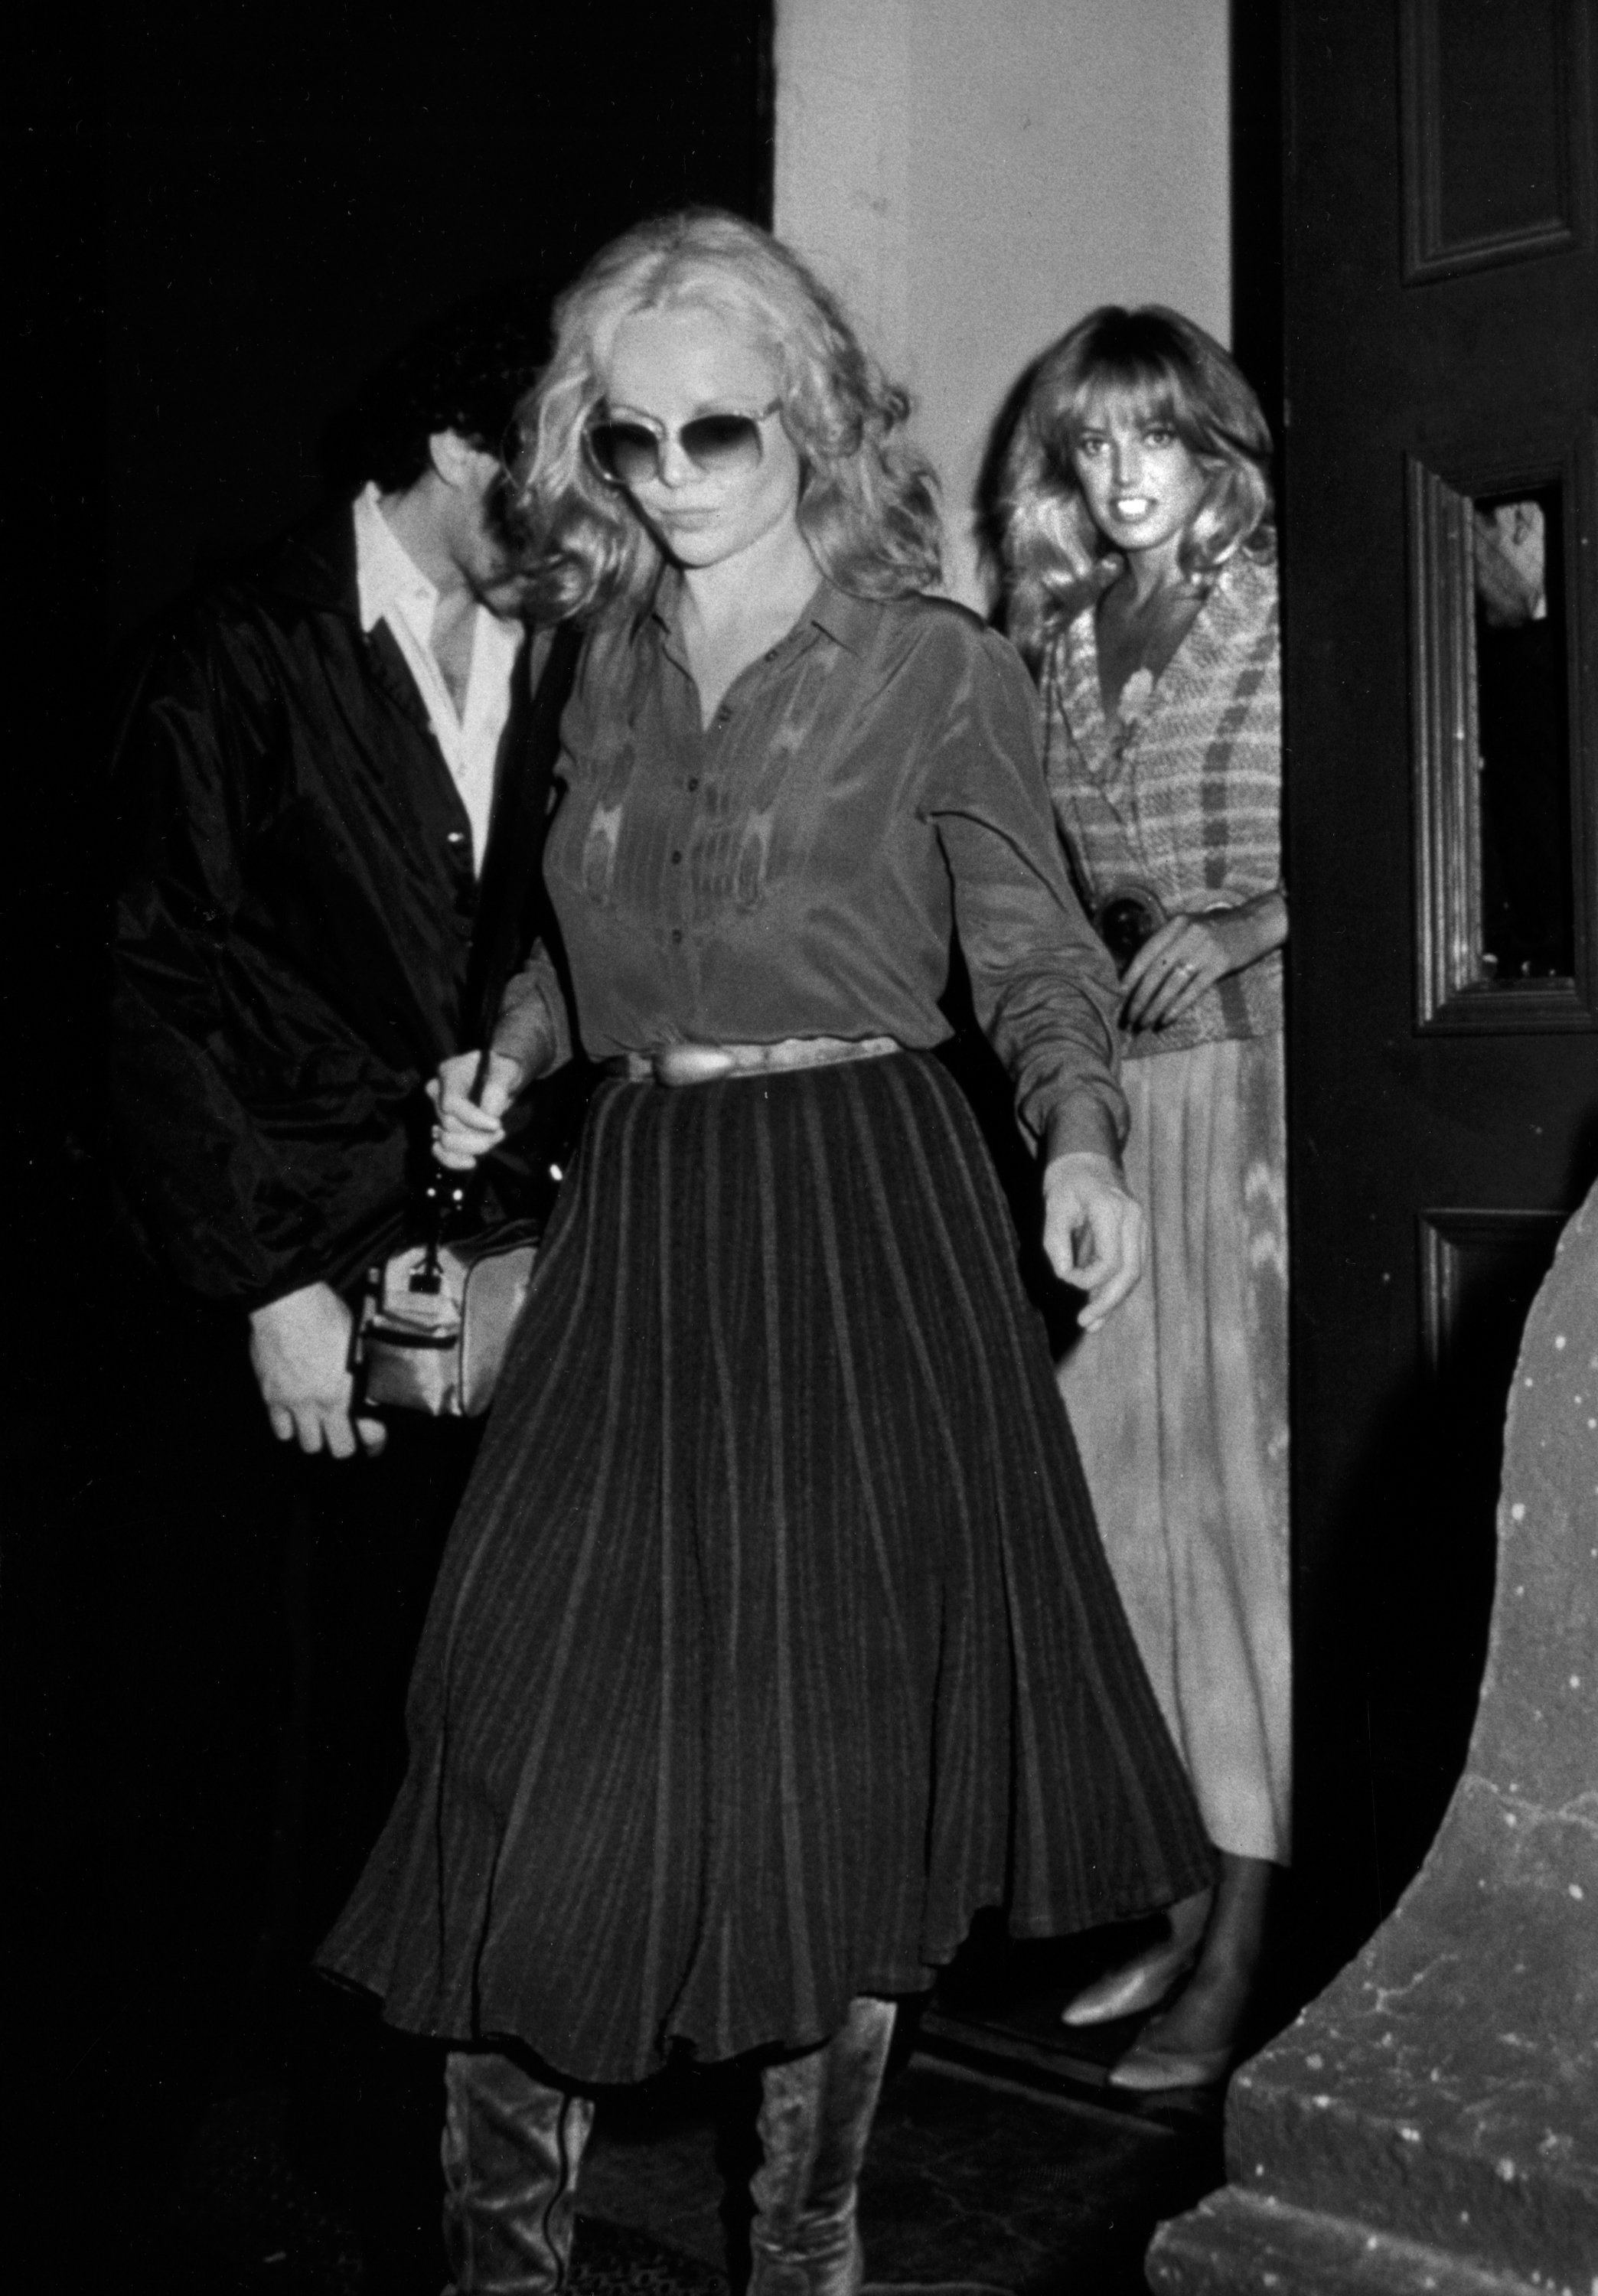 Tuesday Weld and Susan Anton at Carnegie Hall, New York City on June 6, 1983. | Source: Getty Images